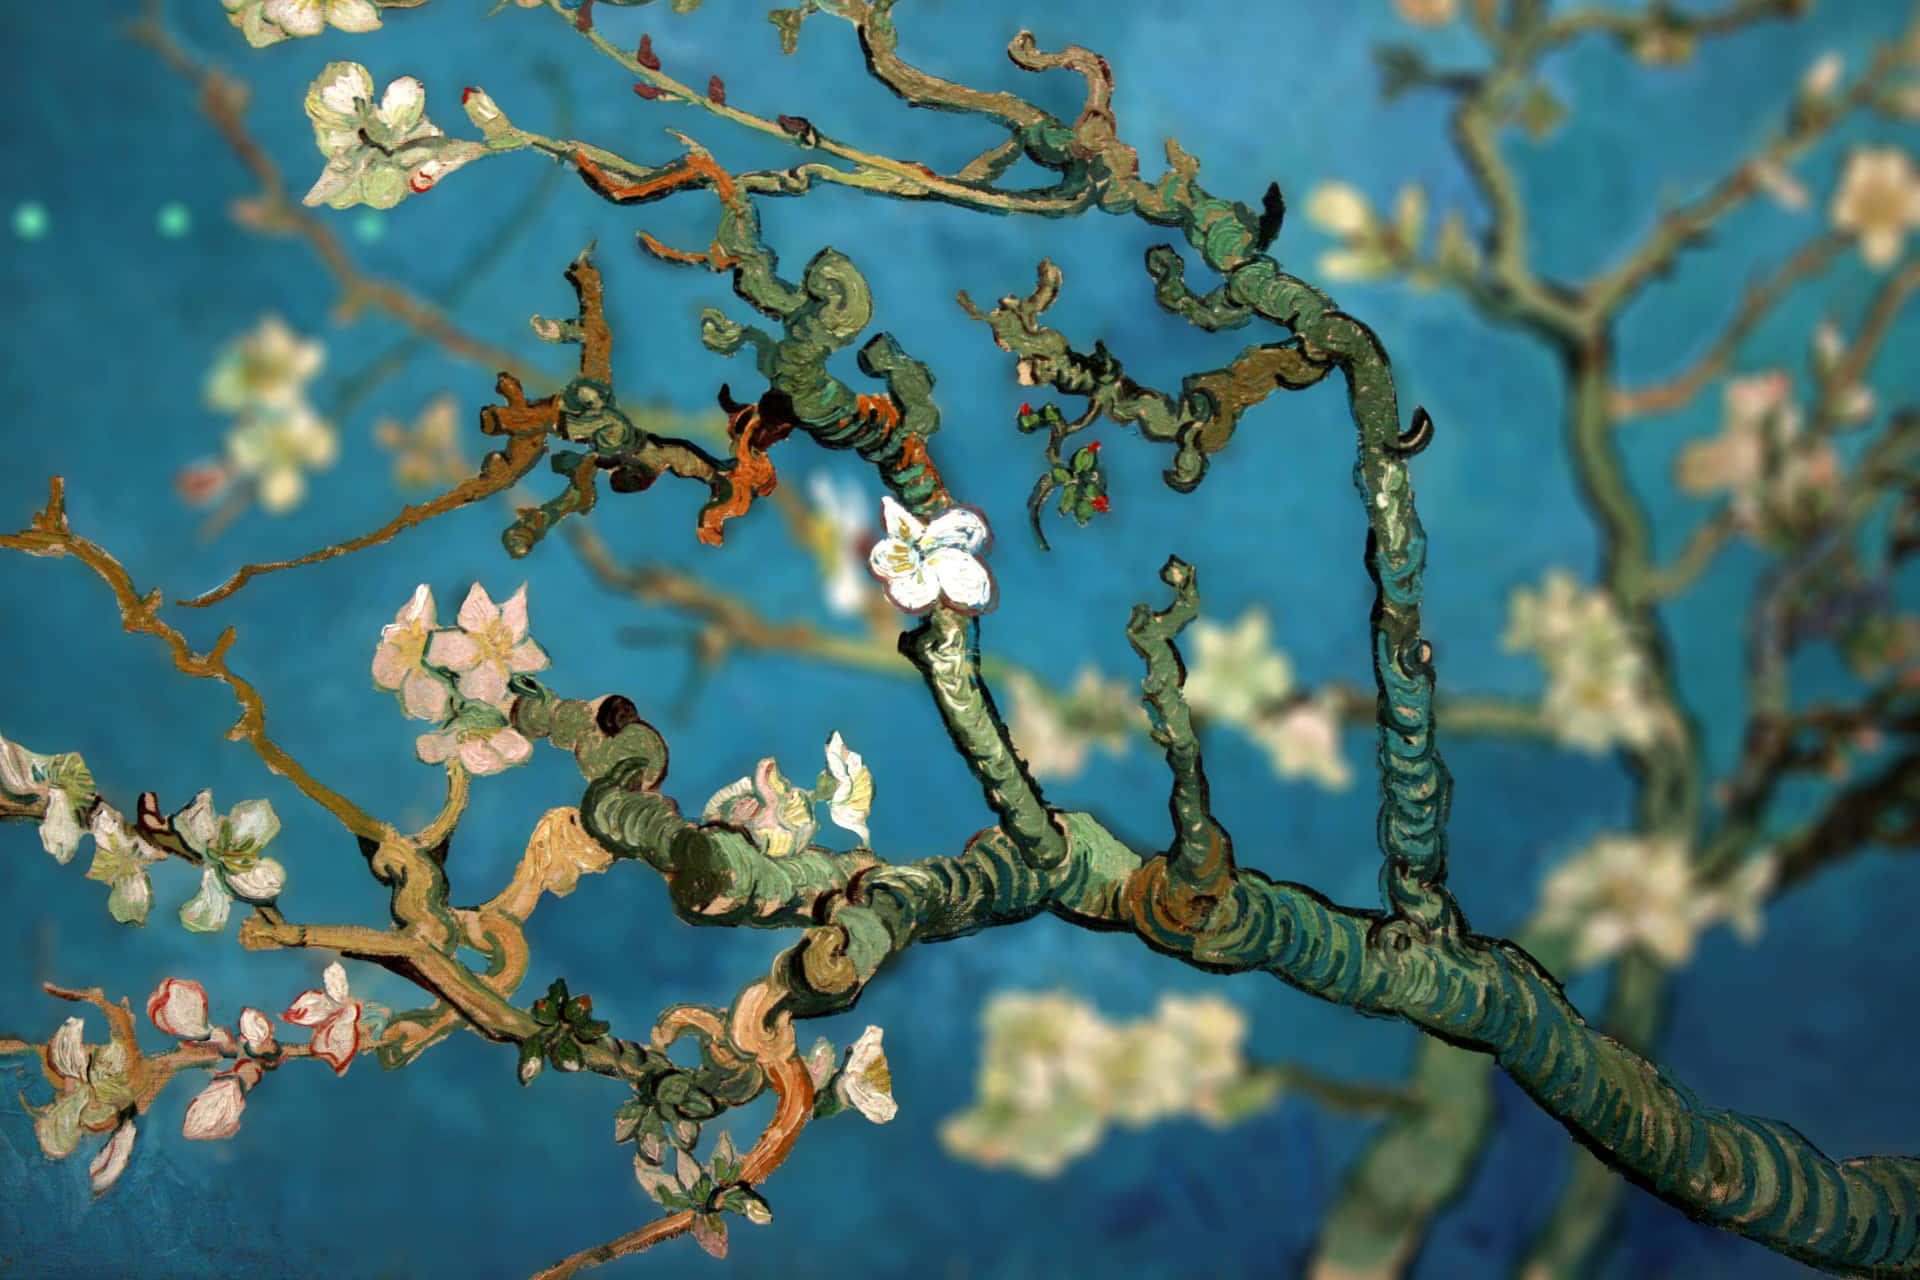 10 New Van Gogh Almond Blossoms Wallpaper FULL HD 19201080 For PC  Background  Van gogh wallpaper Painting wallpaper Van gogh almond blossom